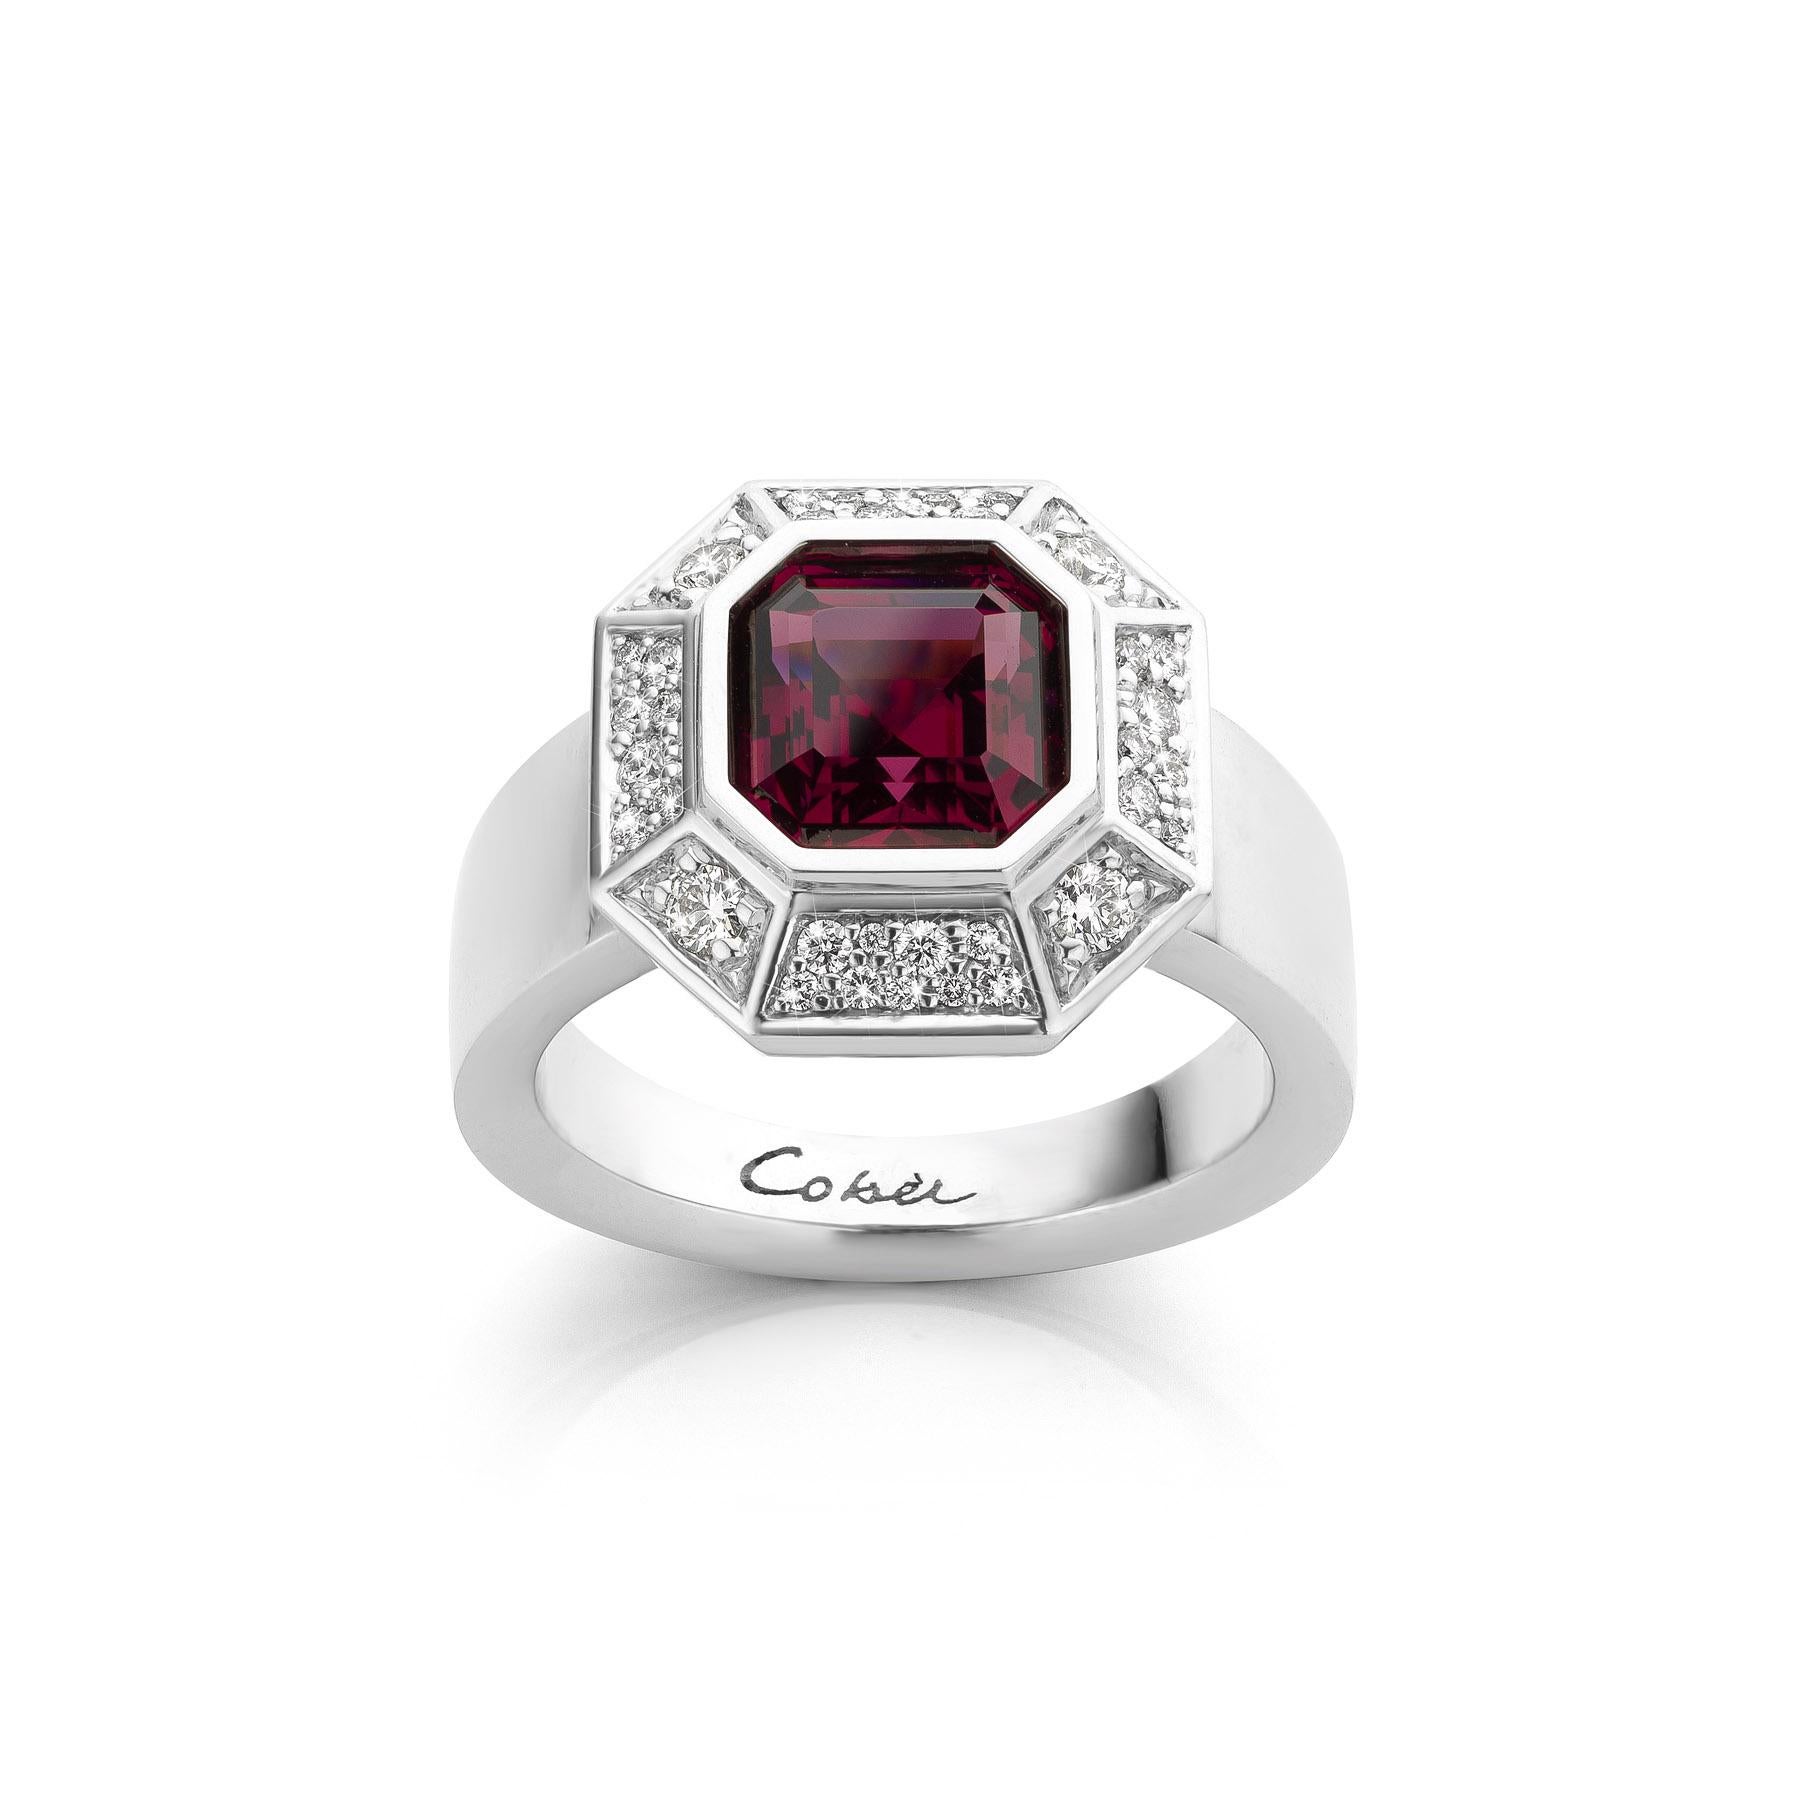 Cober “Catharina” 18K white gold ring with a Asscher-cut Garnet and 30 Diamonds For Sale 2